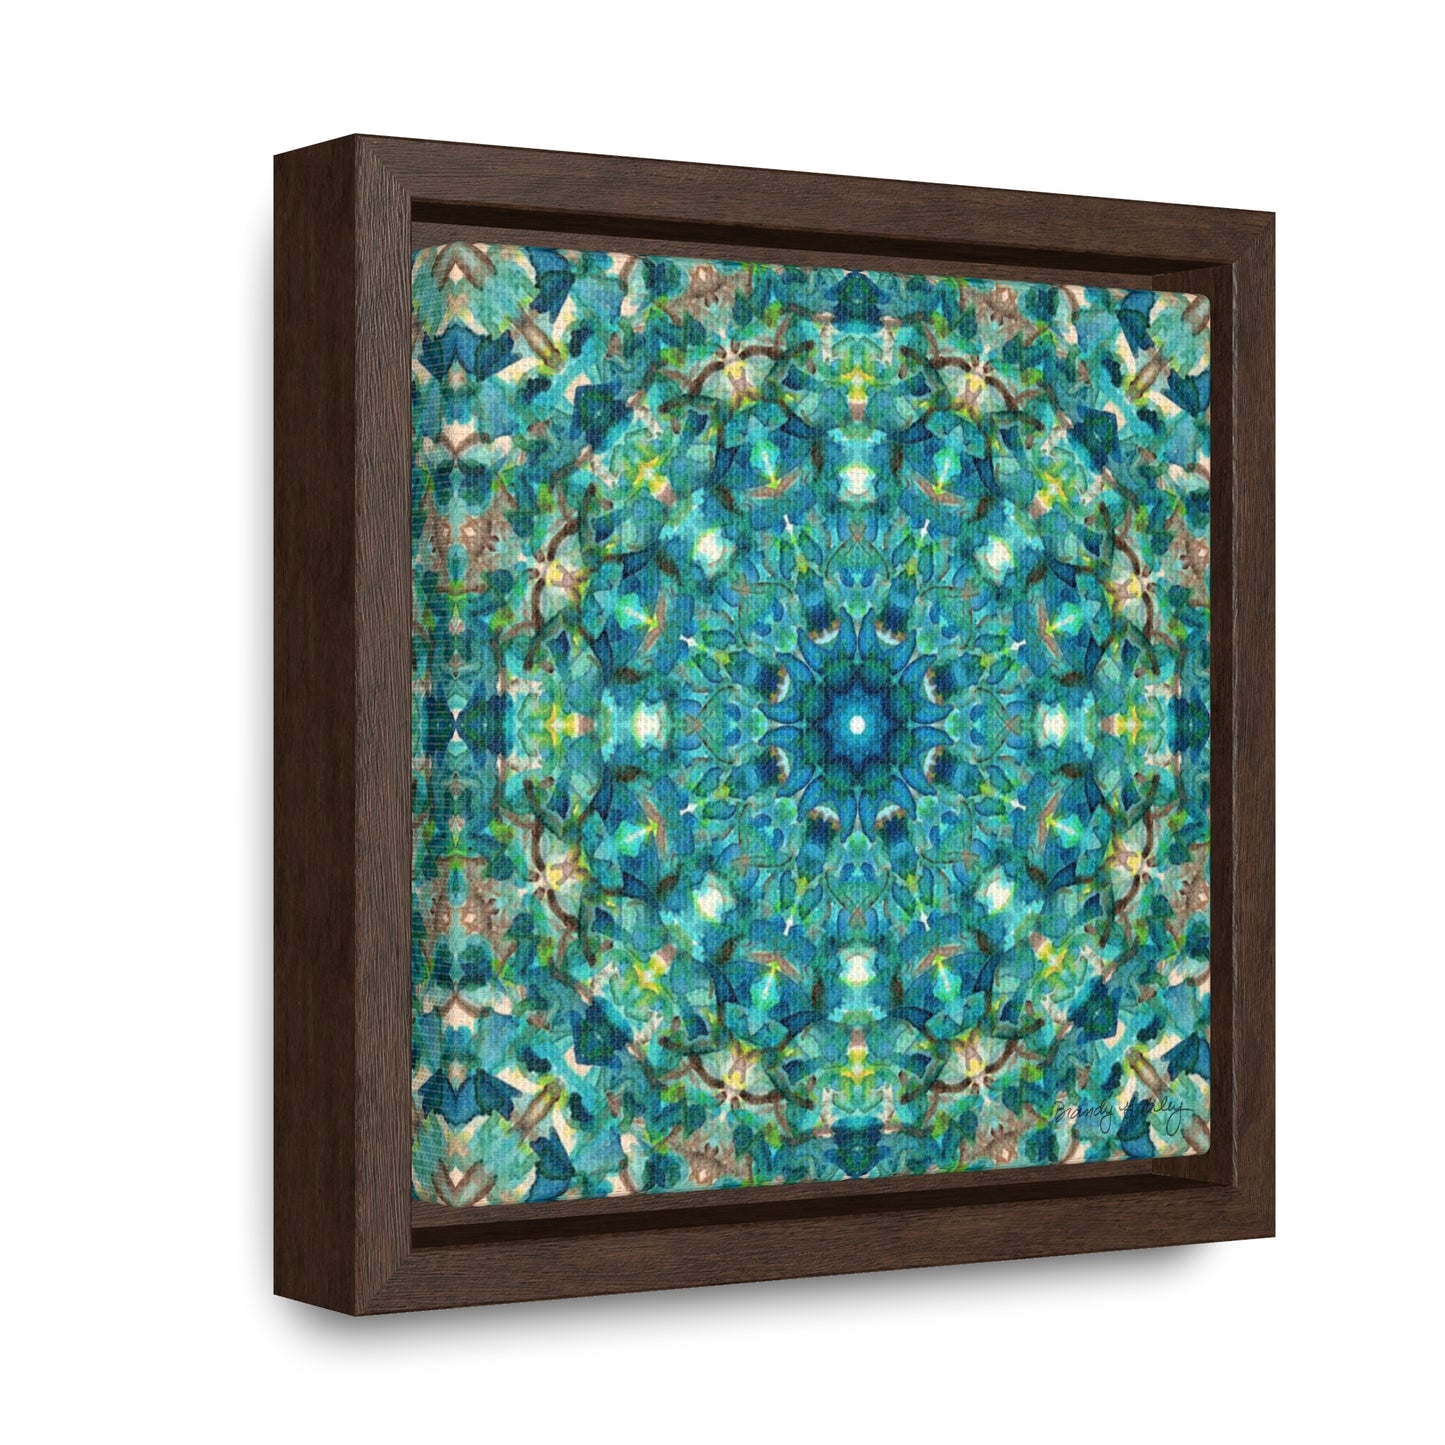 Stretched canvas featuring a teal abstract pattern in a brown float frame